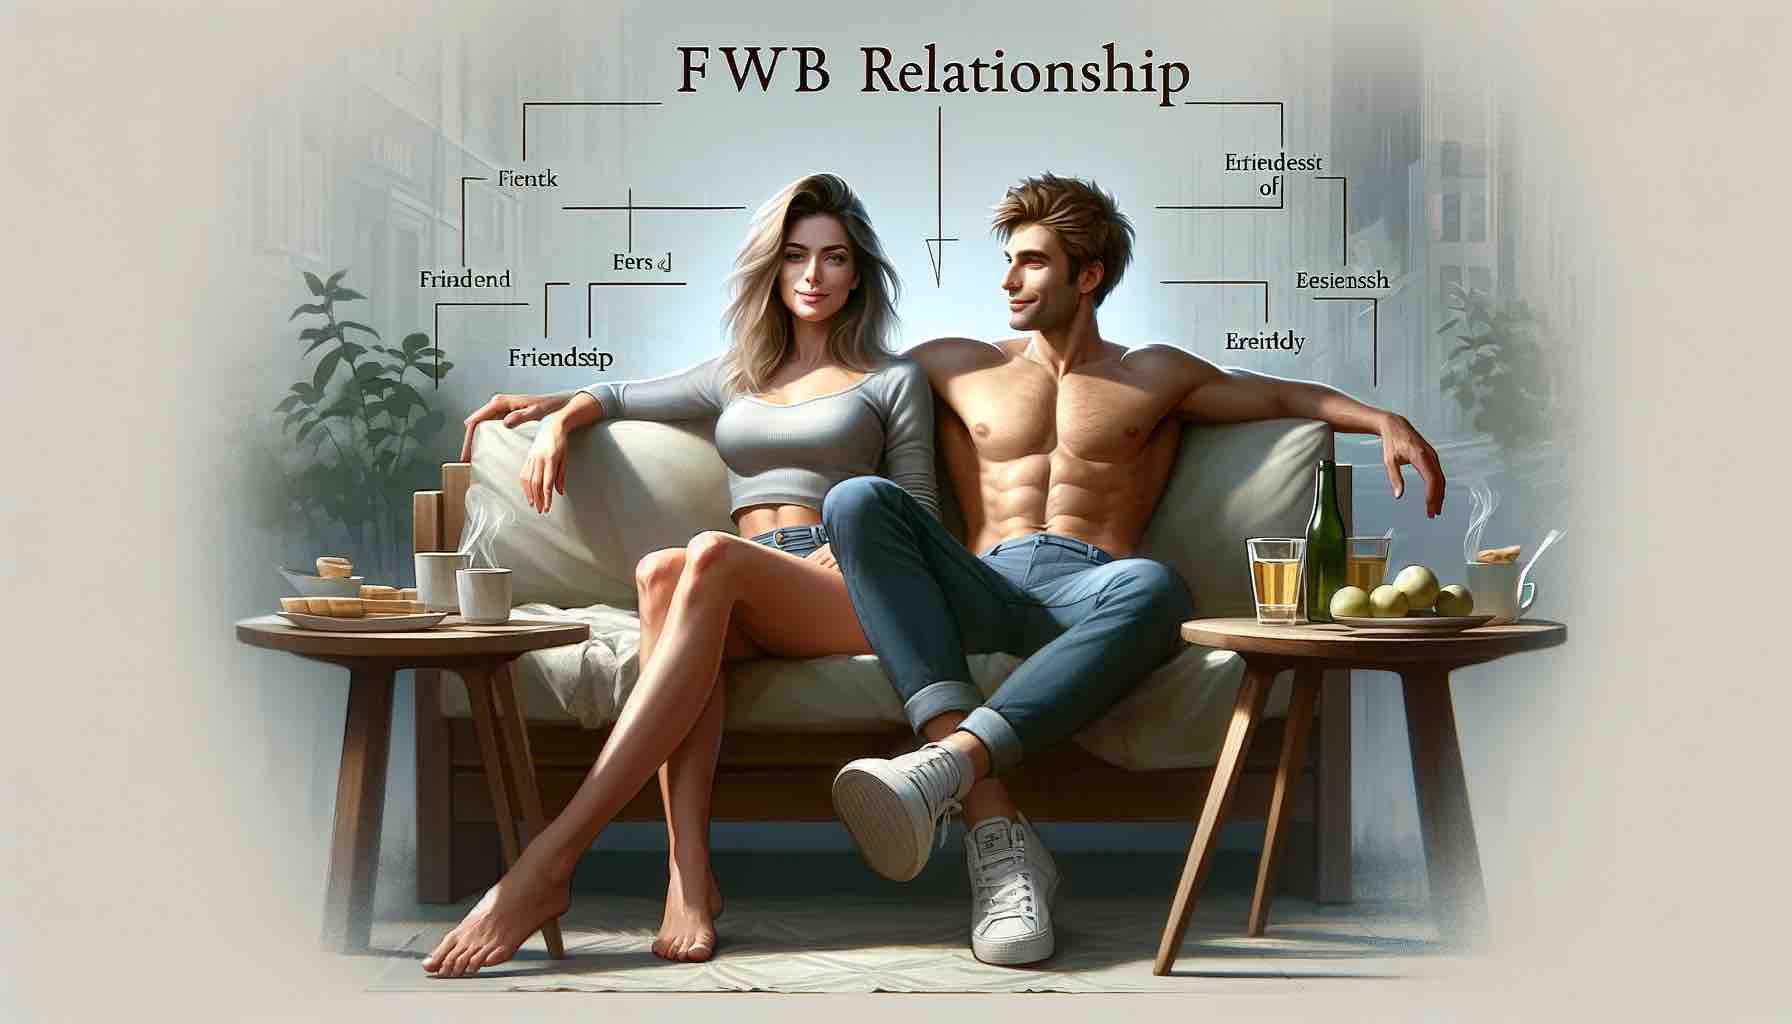 Signs She Is Interested in an FWB Relationship